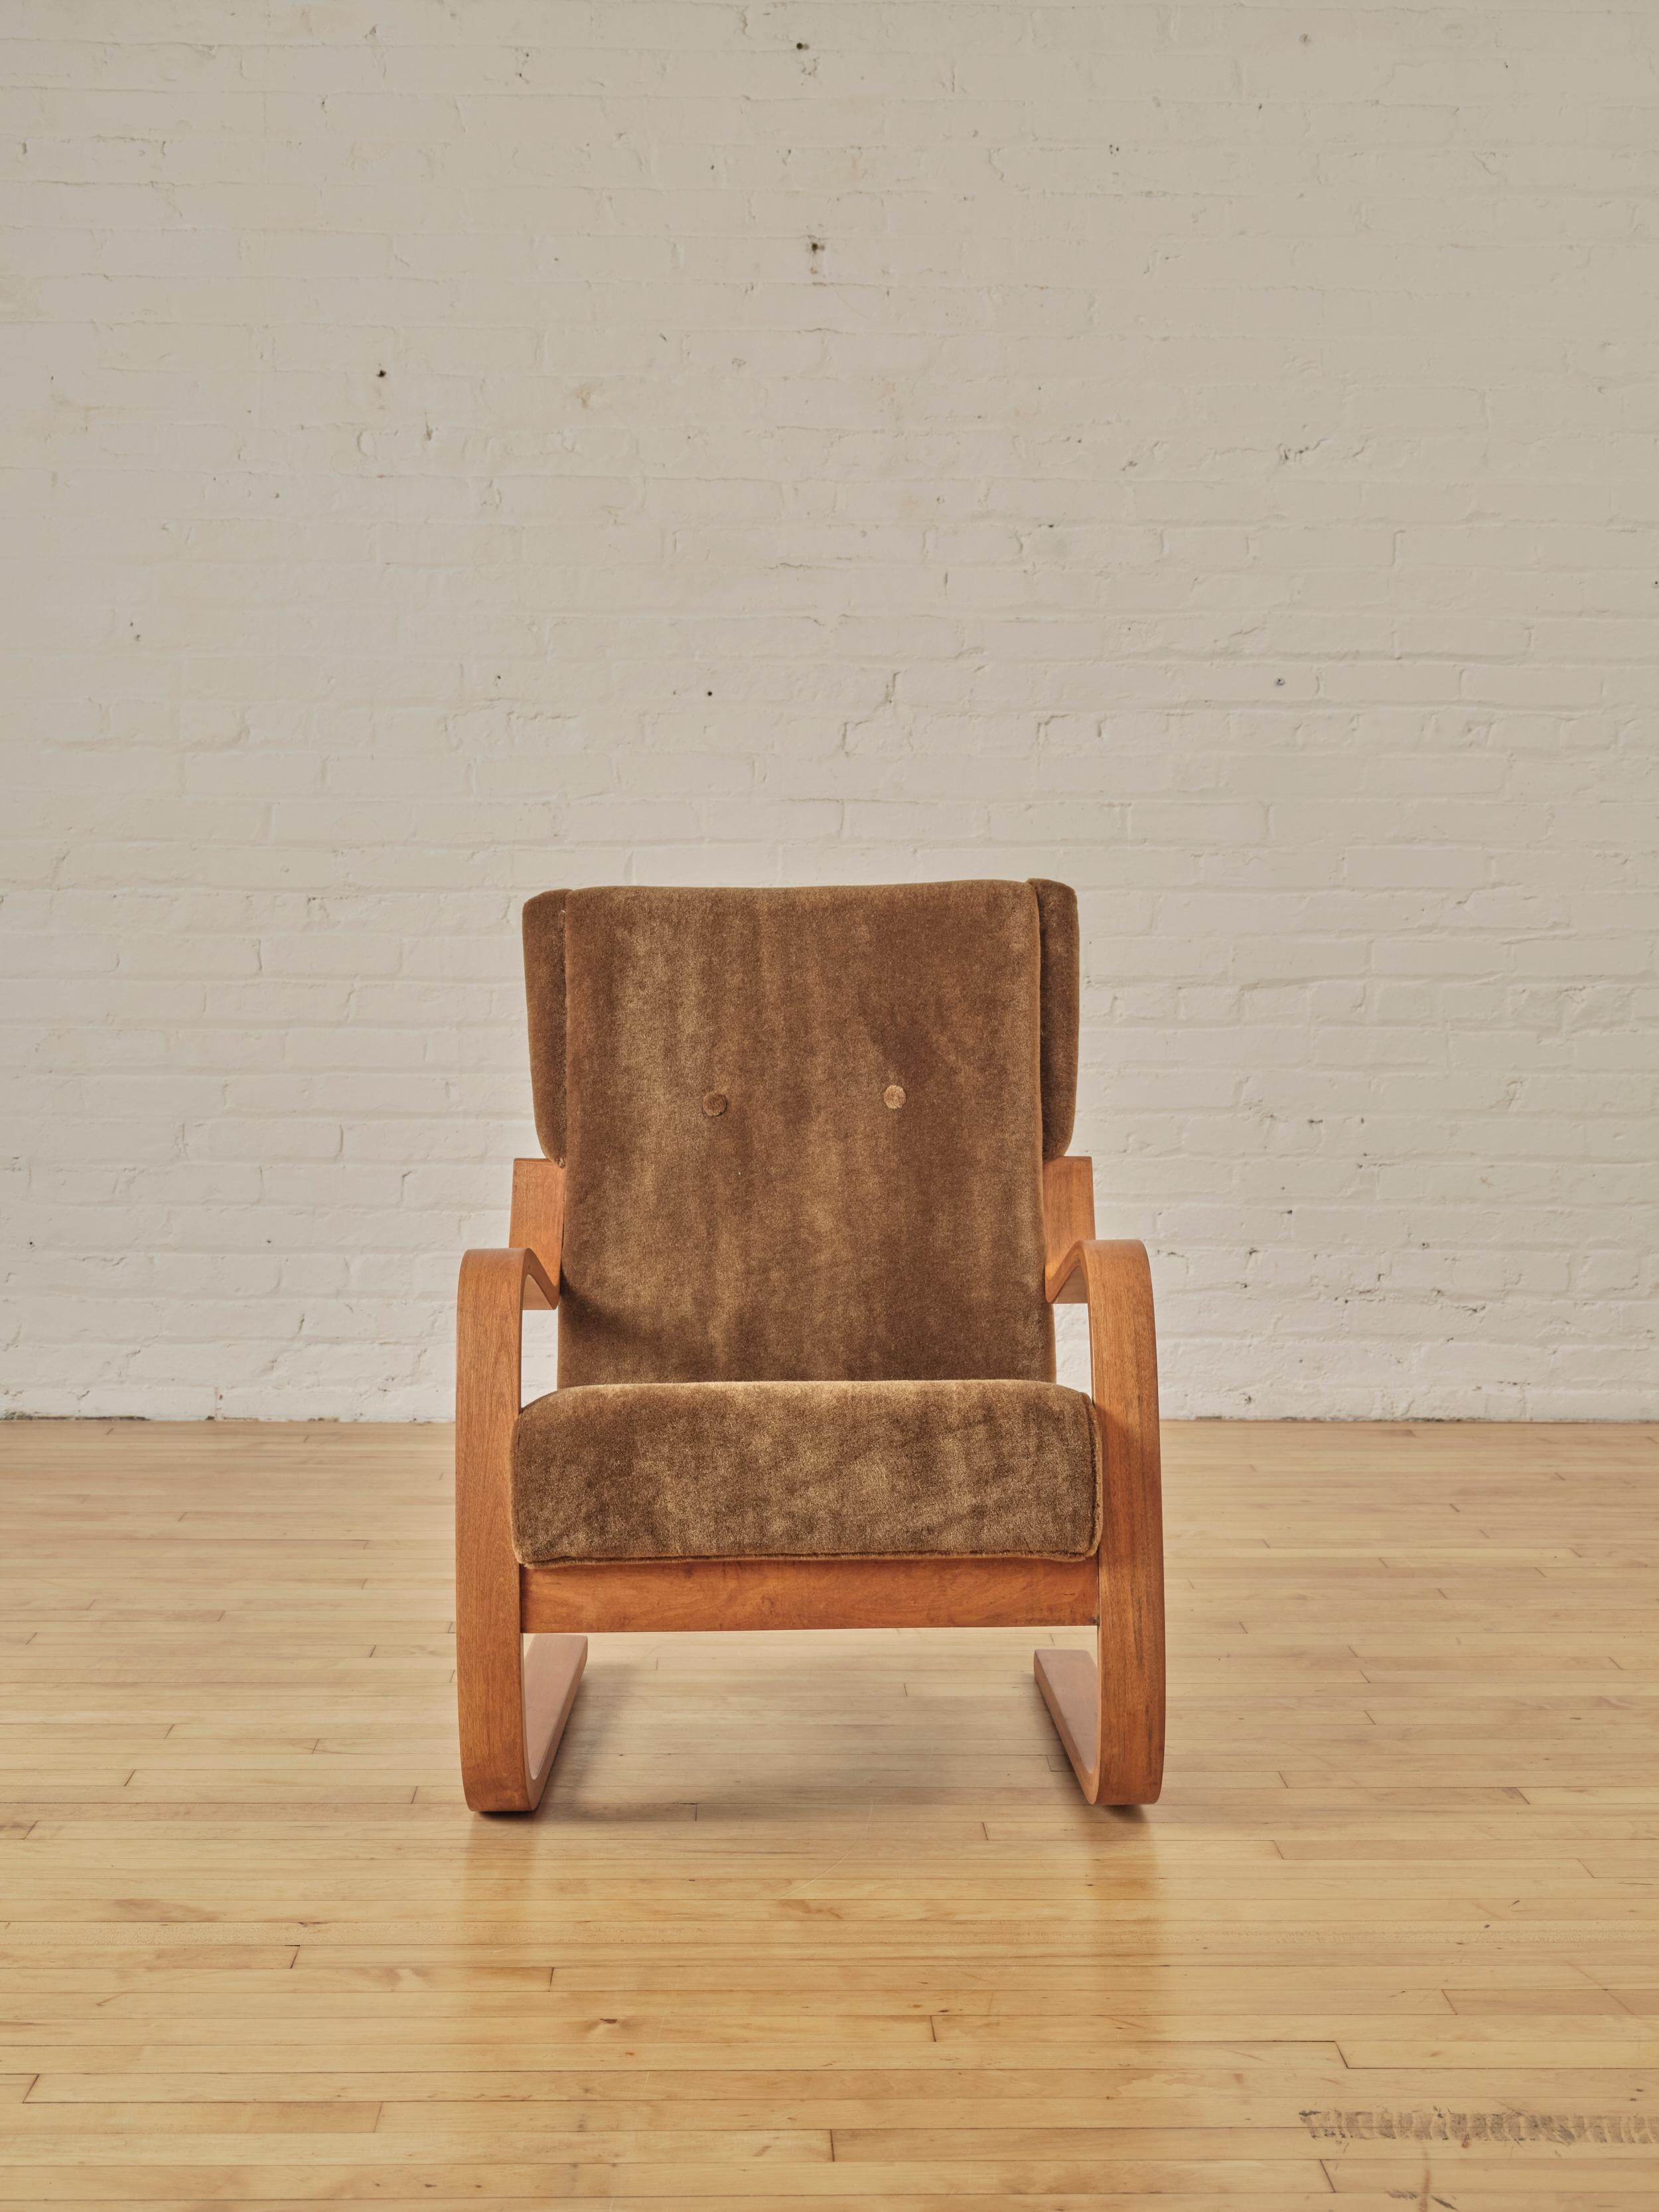 Wingback Chair by Alvar Aalto (Model 401) reupholstered in chocolate brown Mohair

About Alvar Aalto: 

Hugo Alvar Henrik Aalto was a Finnish architect and designer. His work includes architecture, furniture, textiles and glassware, as well as